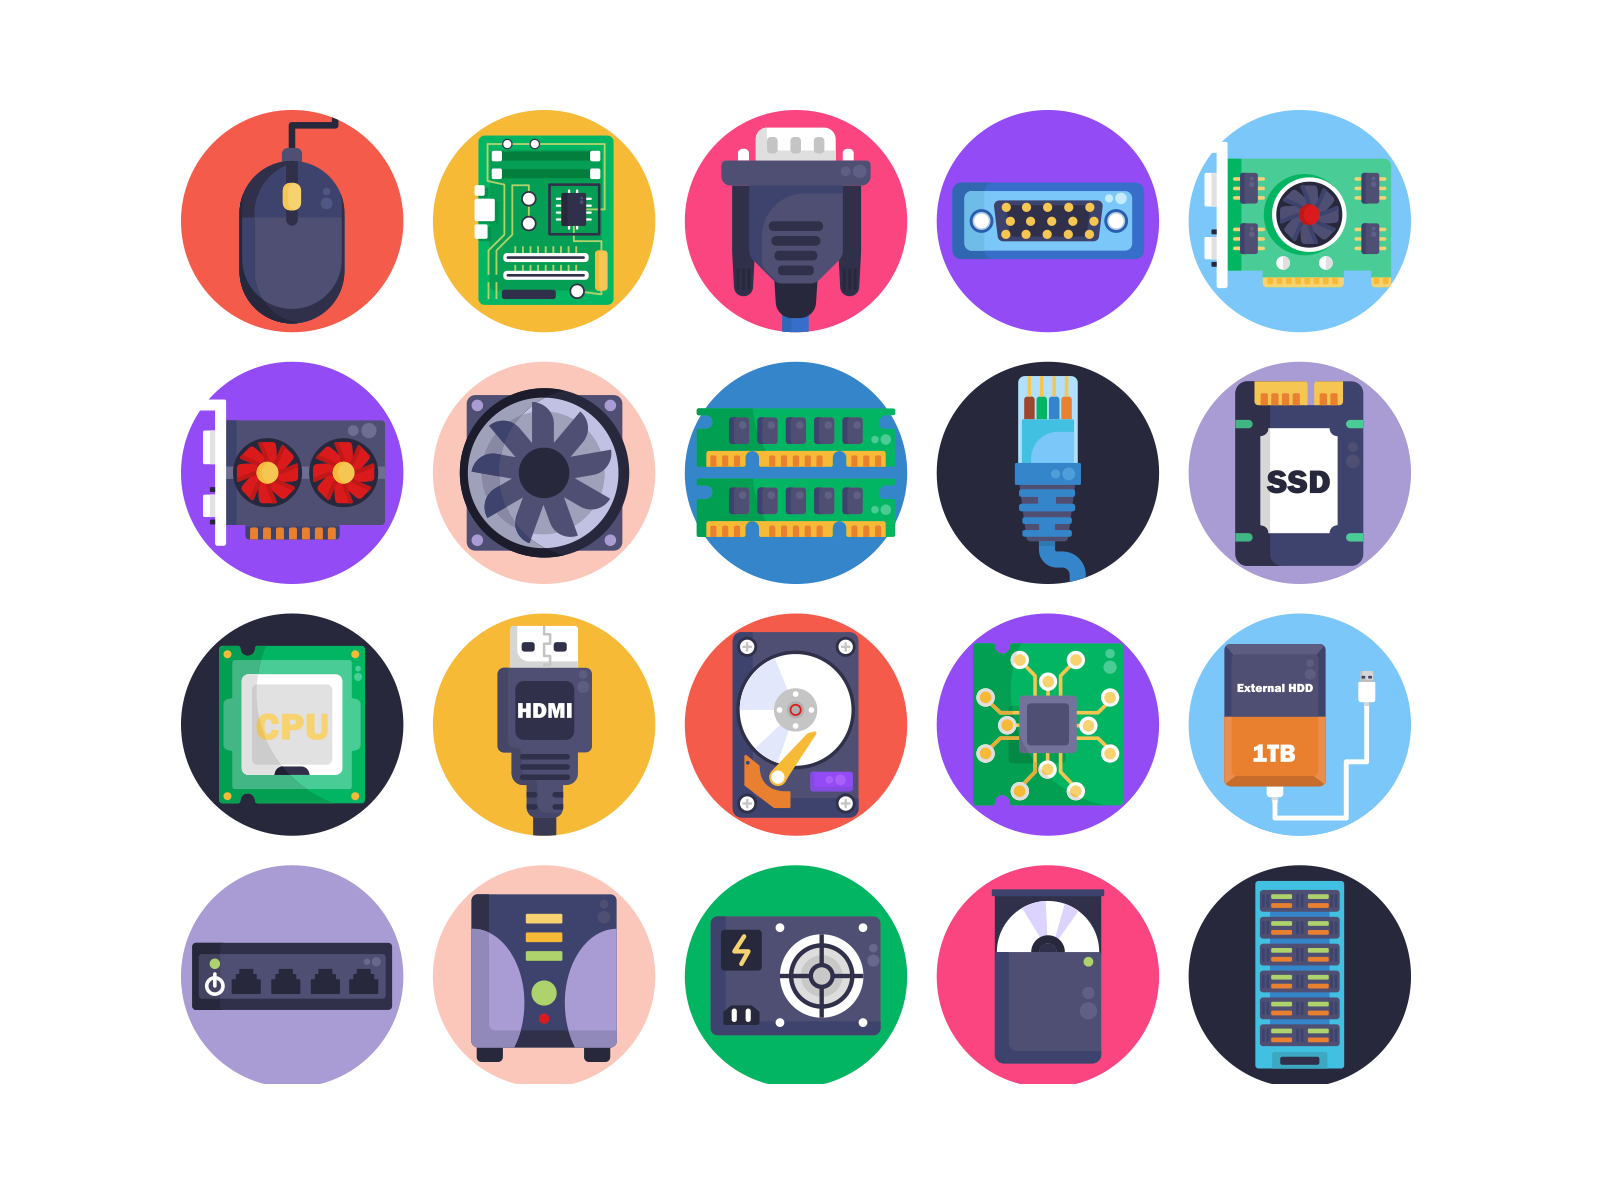 Computer Hardware Icons coloured icons computer flat icons hardware icon icons icons pack illustration pc technology vector vectors